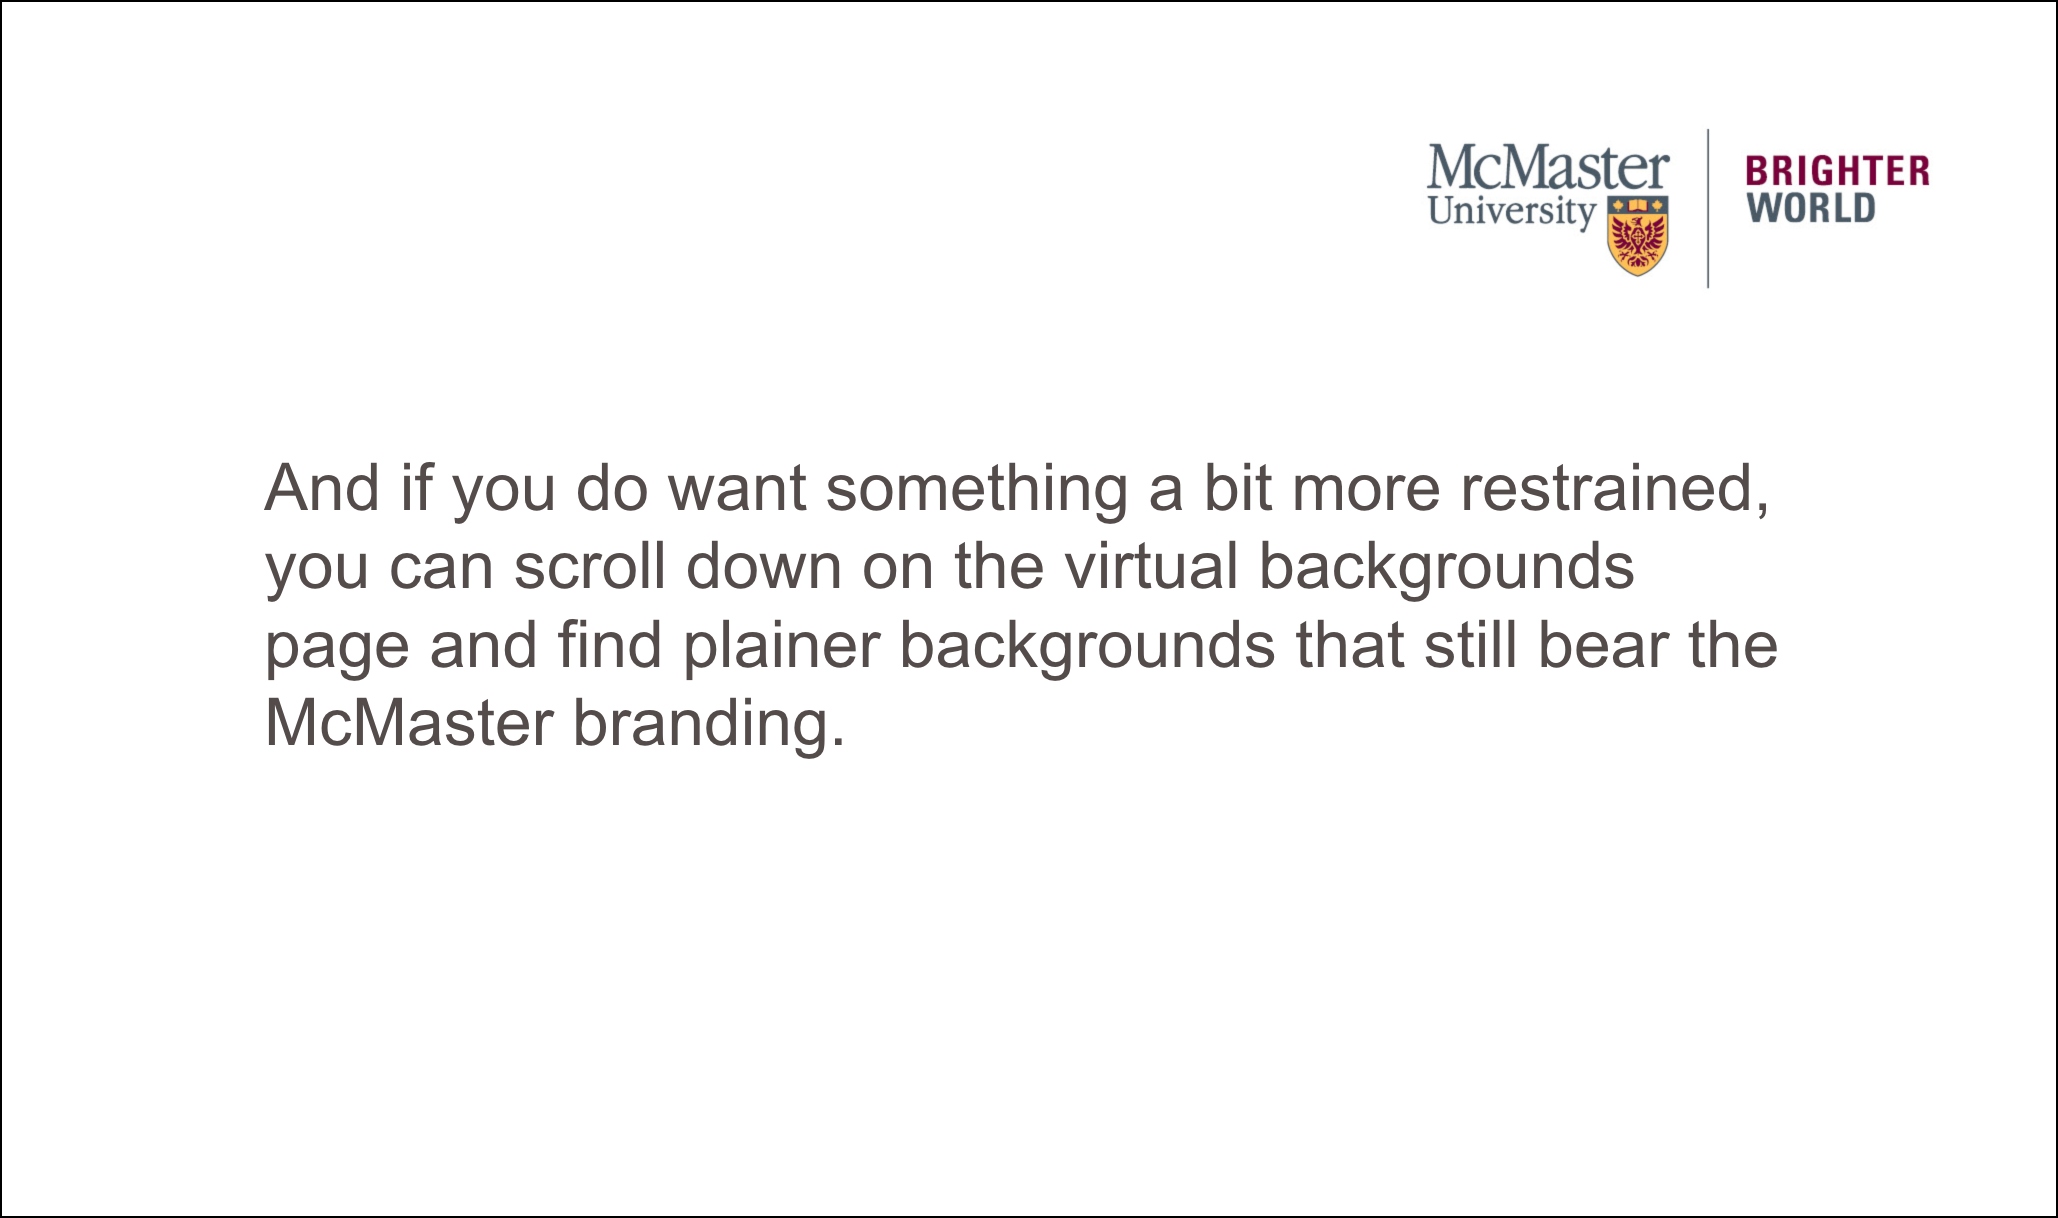 plain background says: And if you do want something a bit more restrained, you can scroll down on the virtual backgrounds page and find plainer backgrounds that still bear the McMaster branding. 